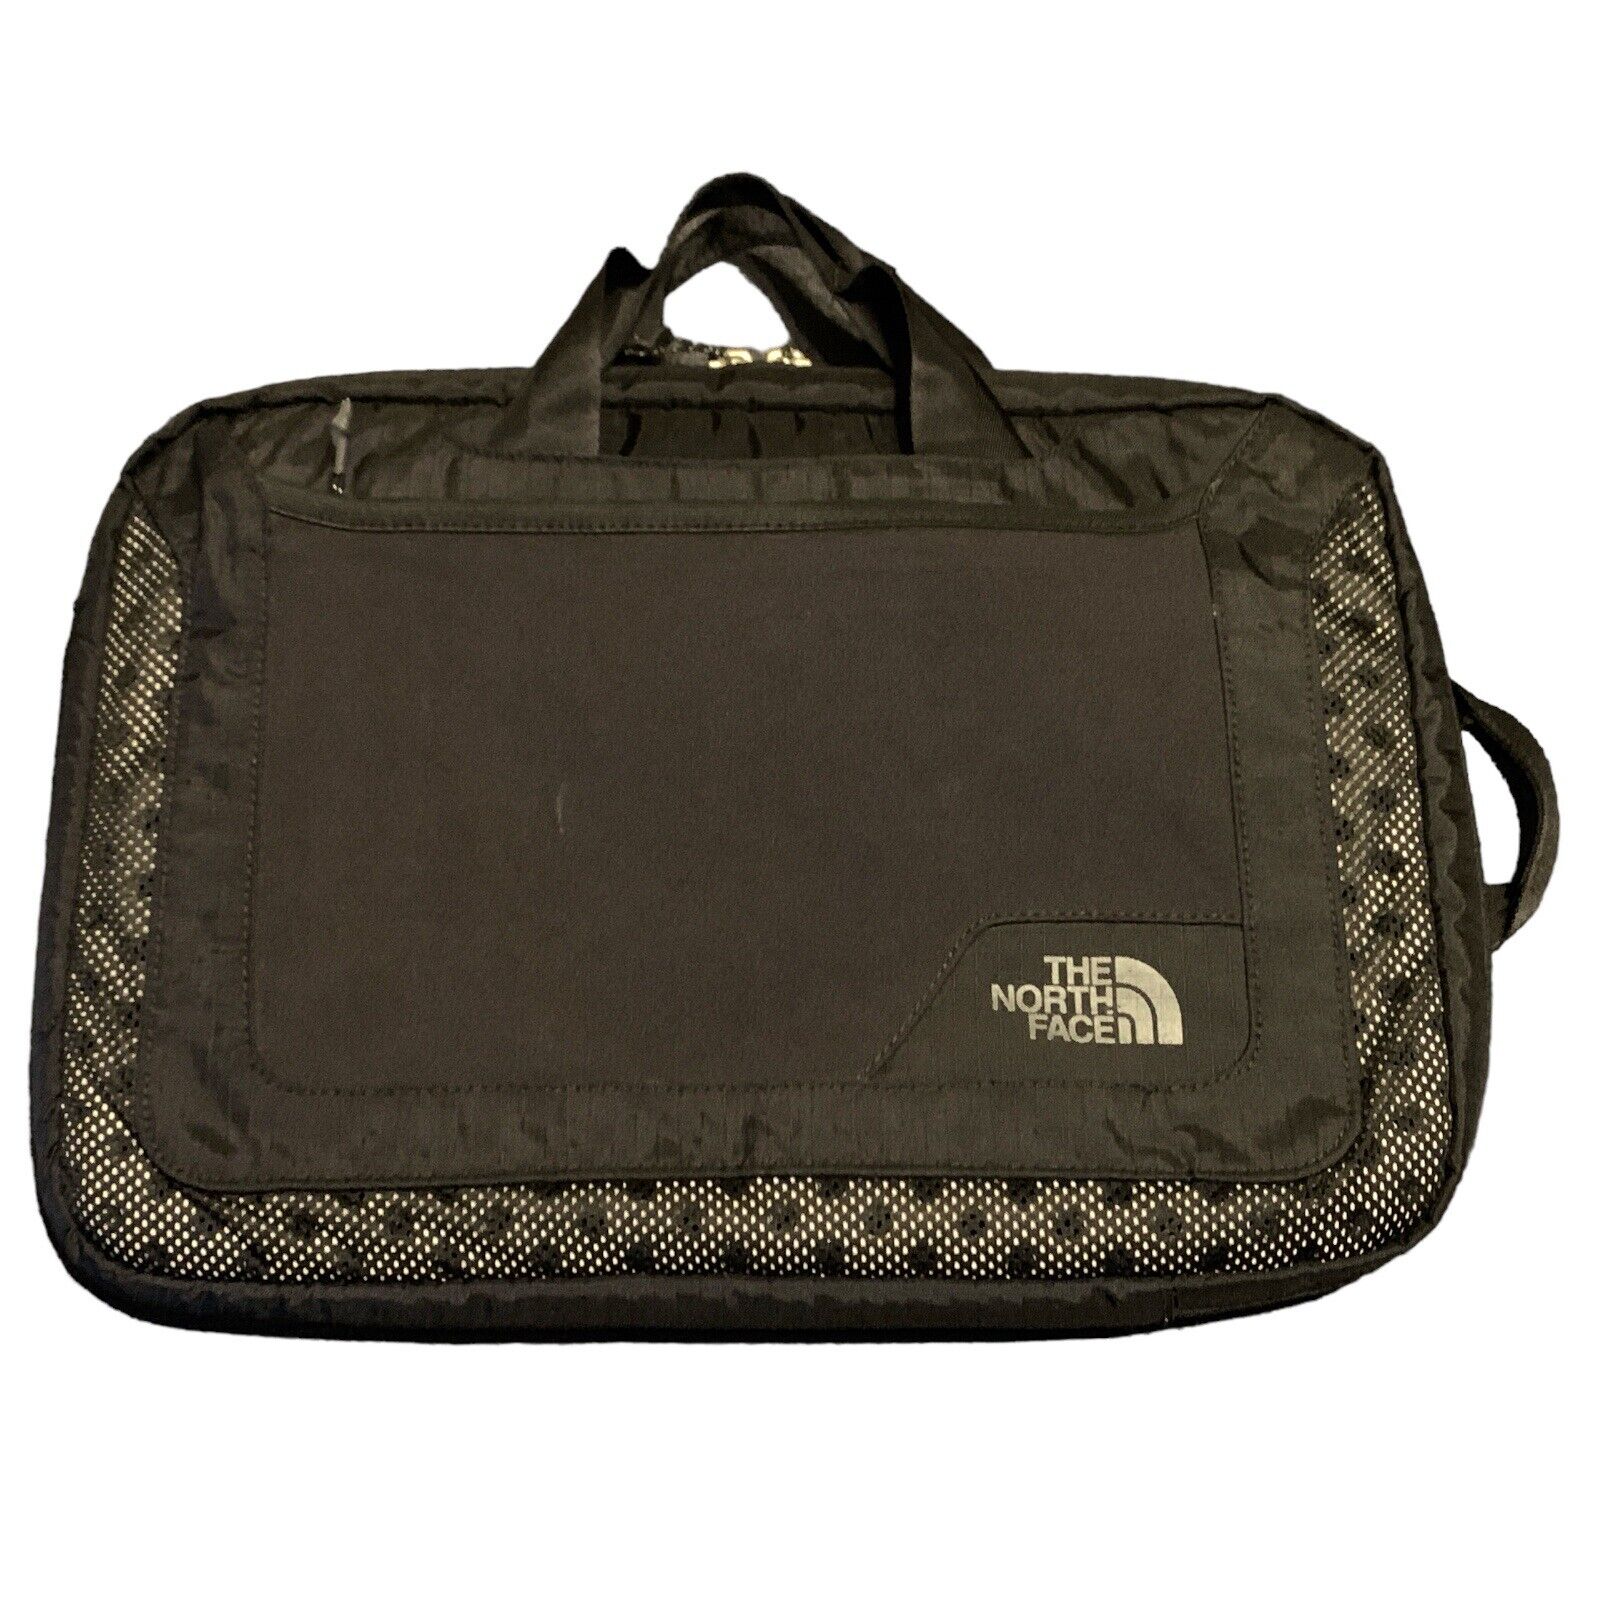 The North Face Lightweight Laptop Sleeve Bag Briefcase Black 11\